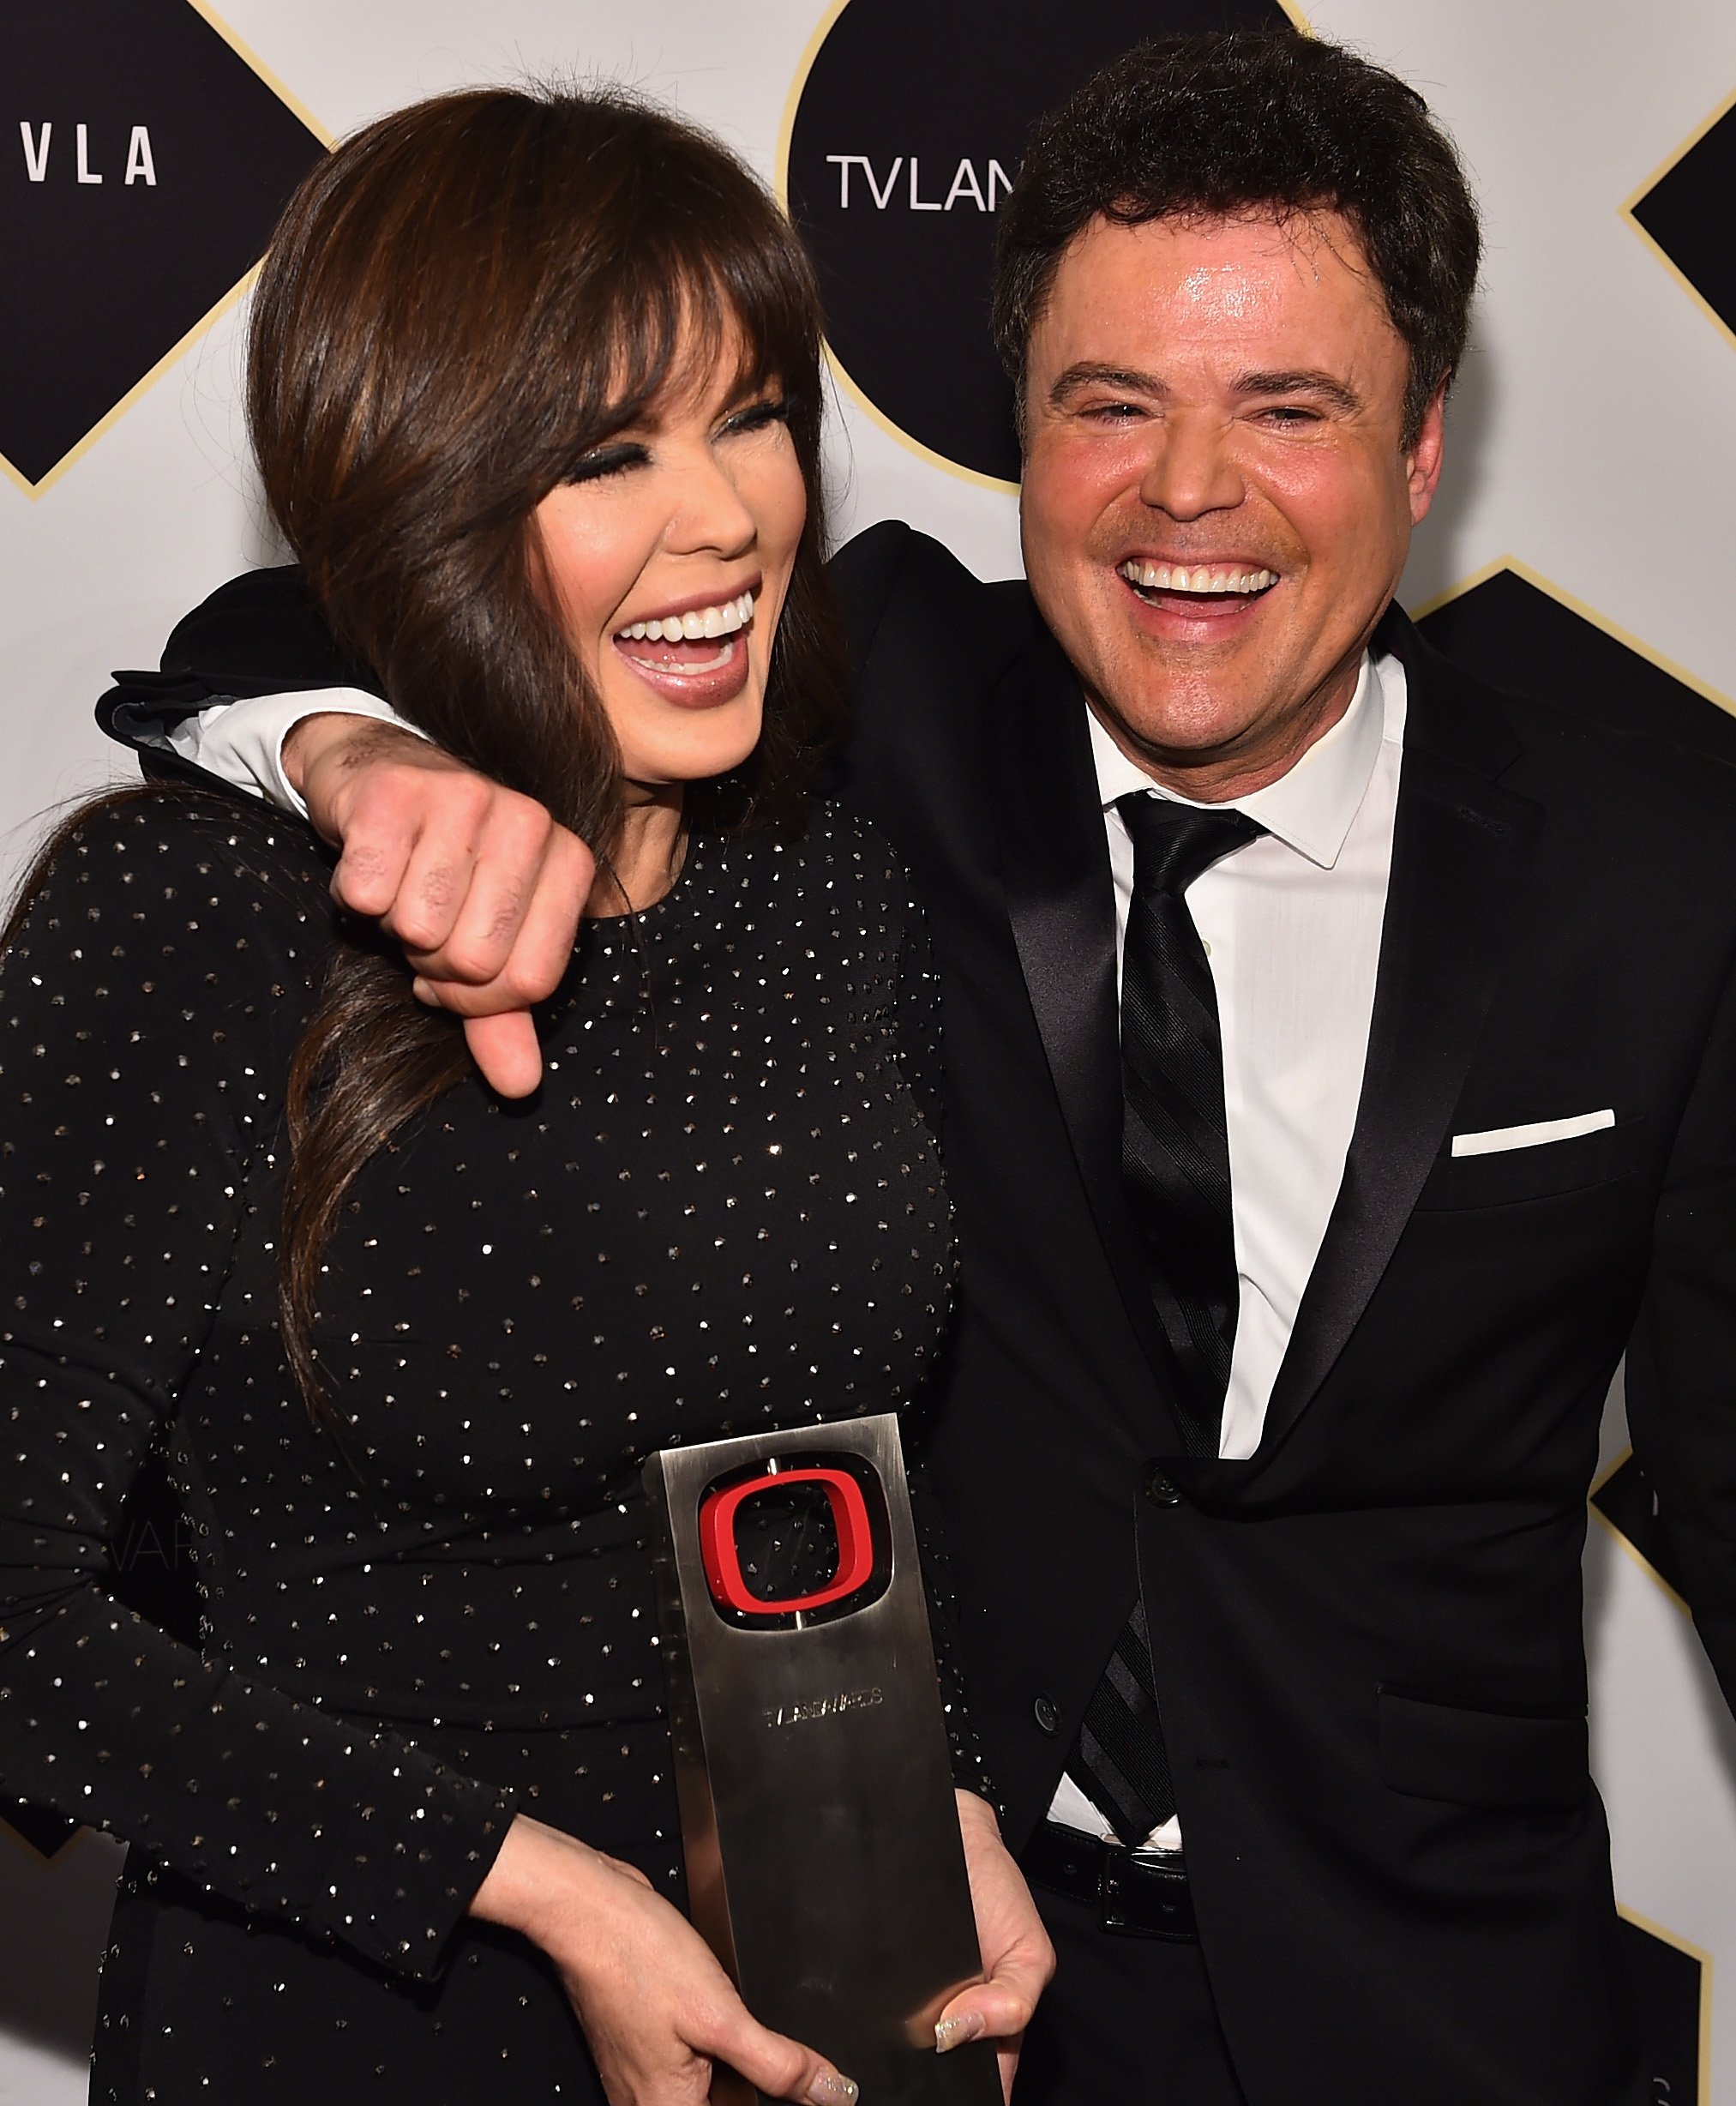 Marie and Donny Osmond during the 2015 TV Land Awards on April 11, 2015 | Photo: GettyImages